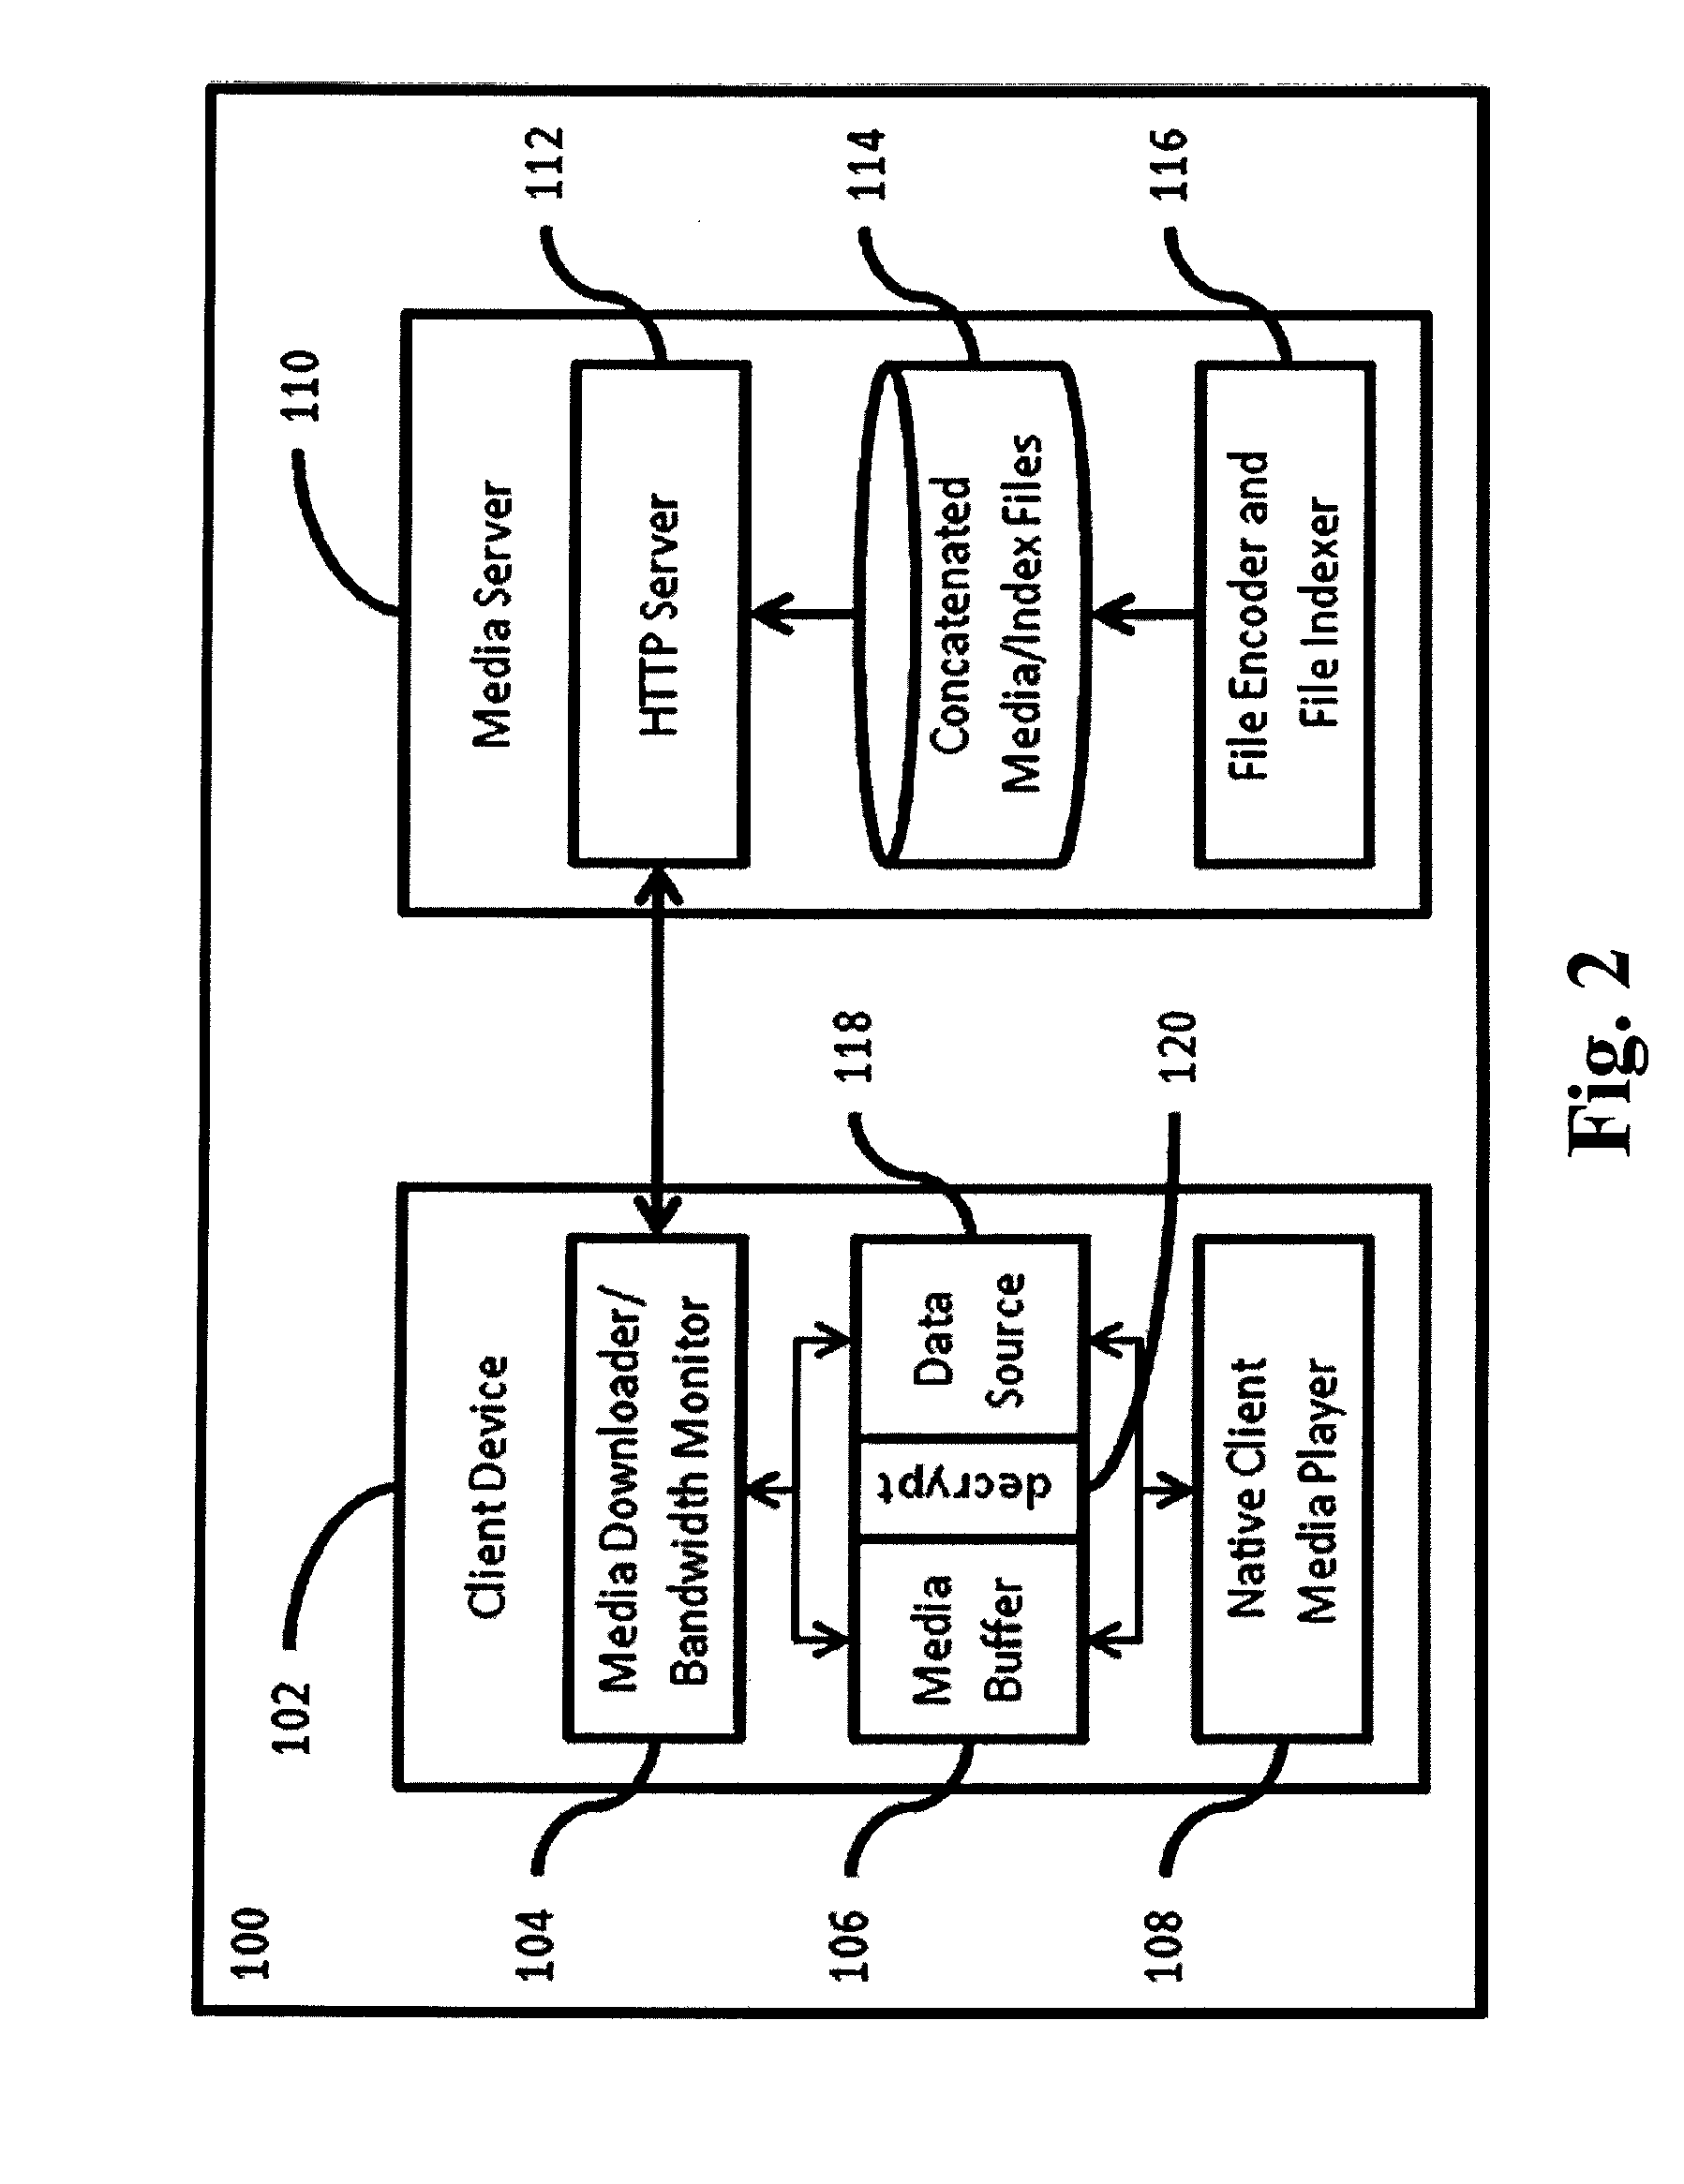 System and method for network aware adaptive streaming for nomadic endpoints